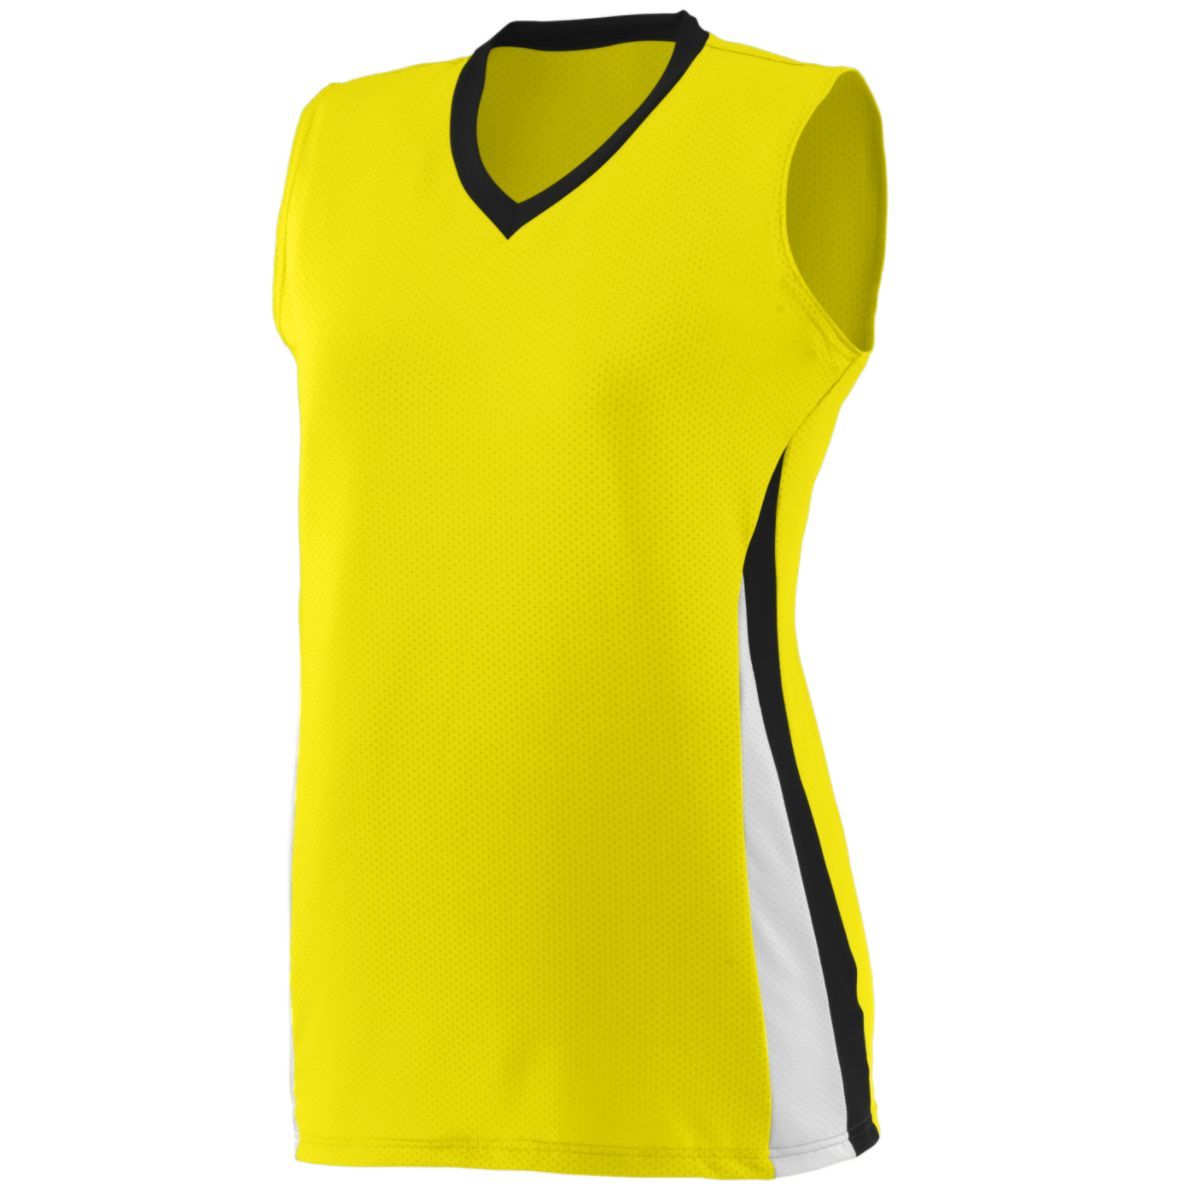 Augusta Sportswear Girls Tornado Jersey in Power Yellow/Black/White  -Part of the Girls, Augusta-Products, Volleyball, Girls-Jersey, Shirts product lines at KanaleyCreations.com